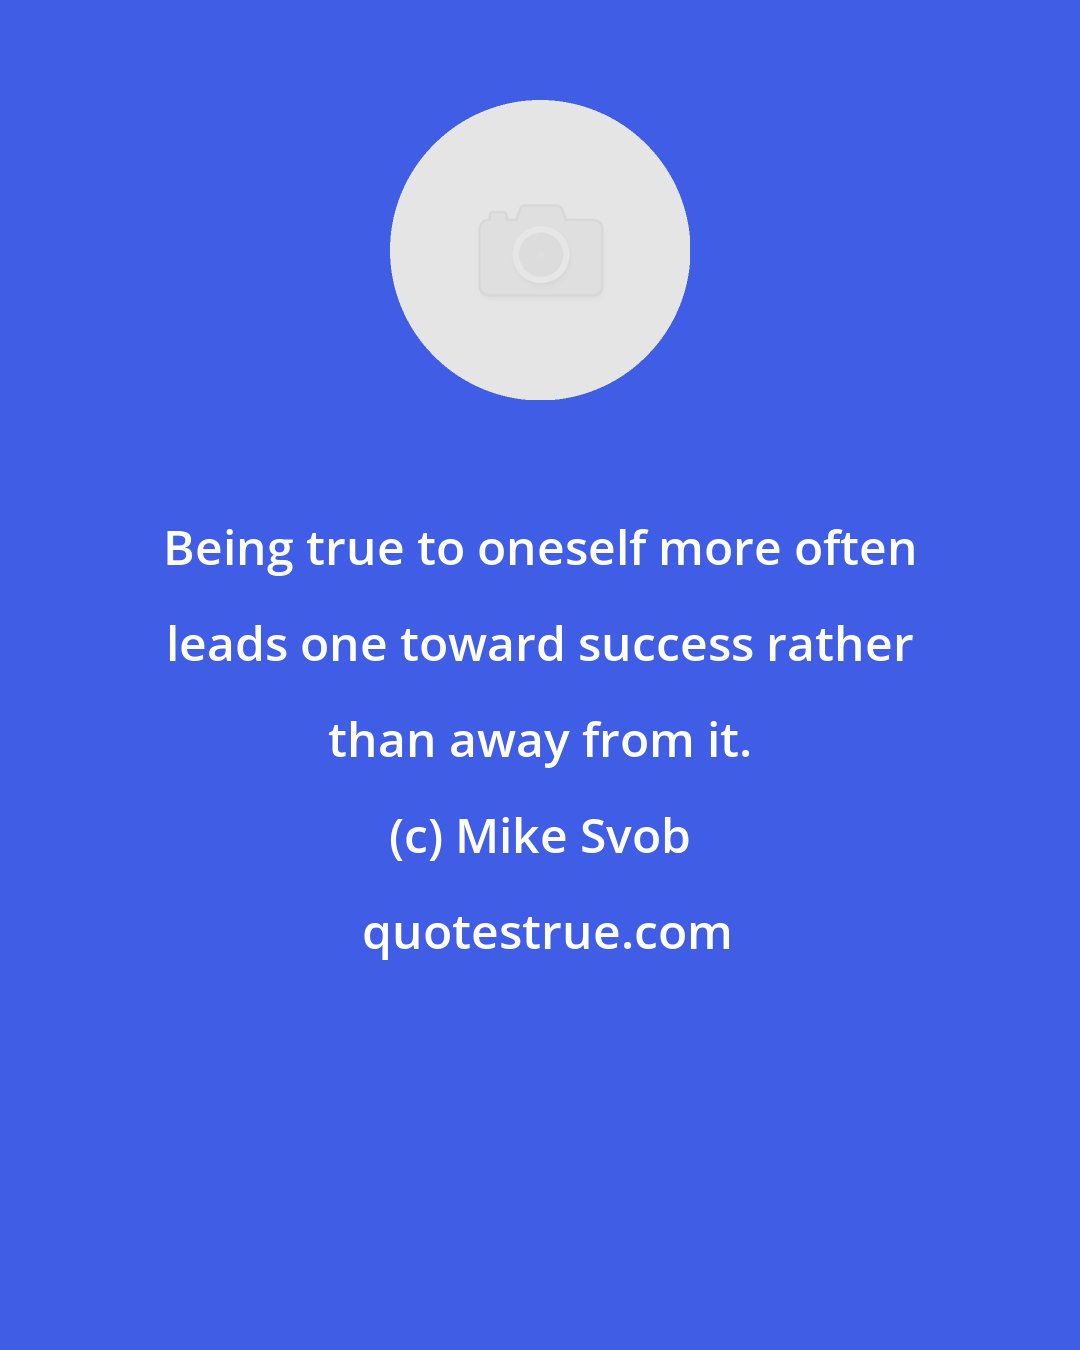 Mike Svob: Being true to oneself more often leads one toward success rather than away from it.